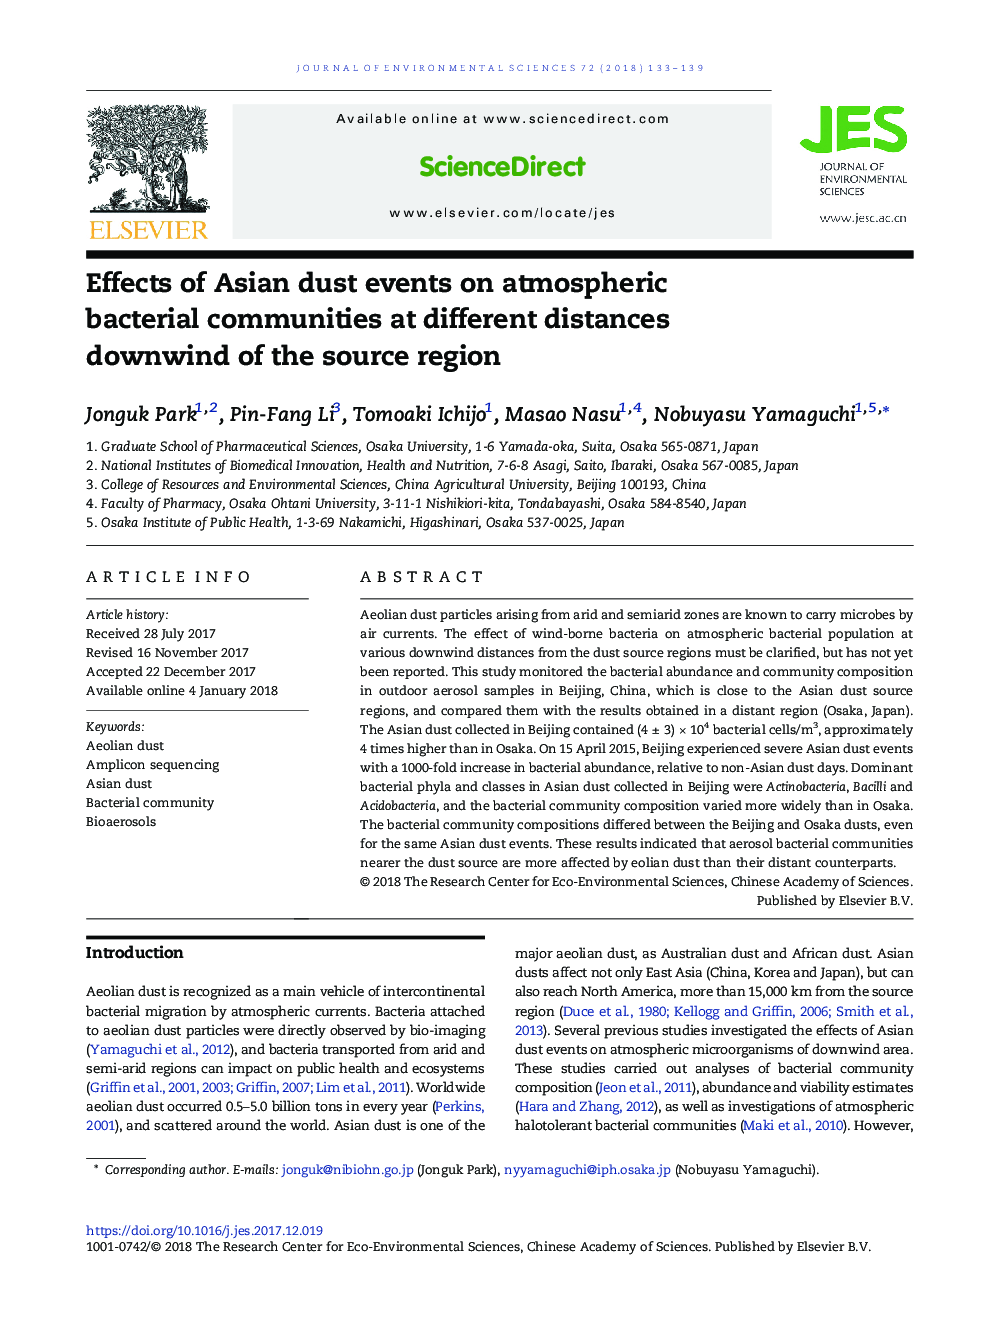 Effects of Asian dust events on atmospheric bacterial communities at different distances downwind of the source region